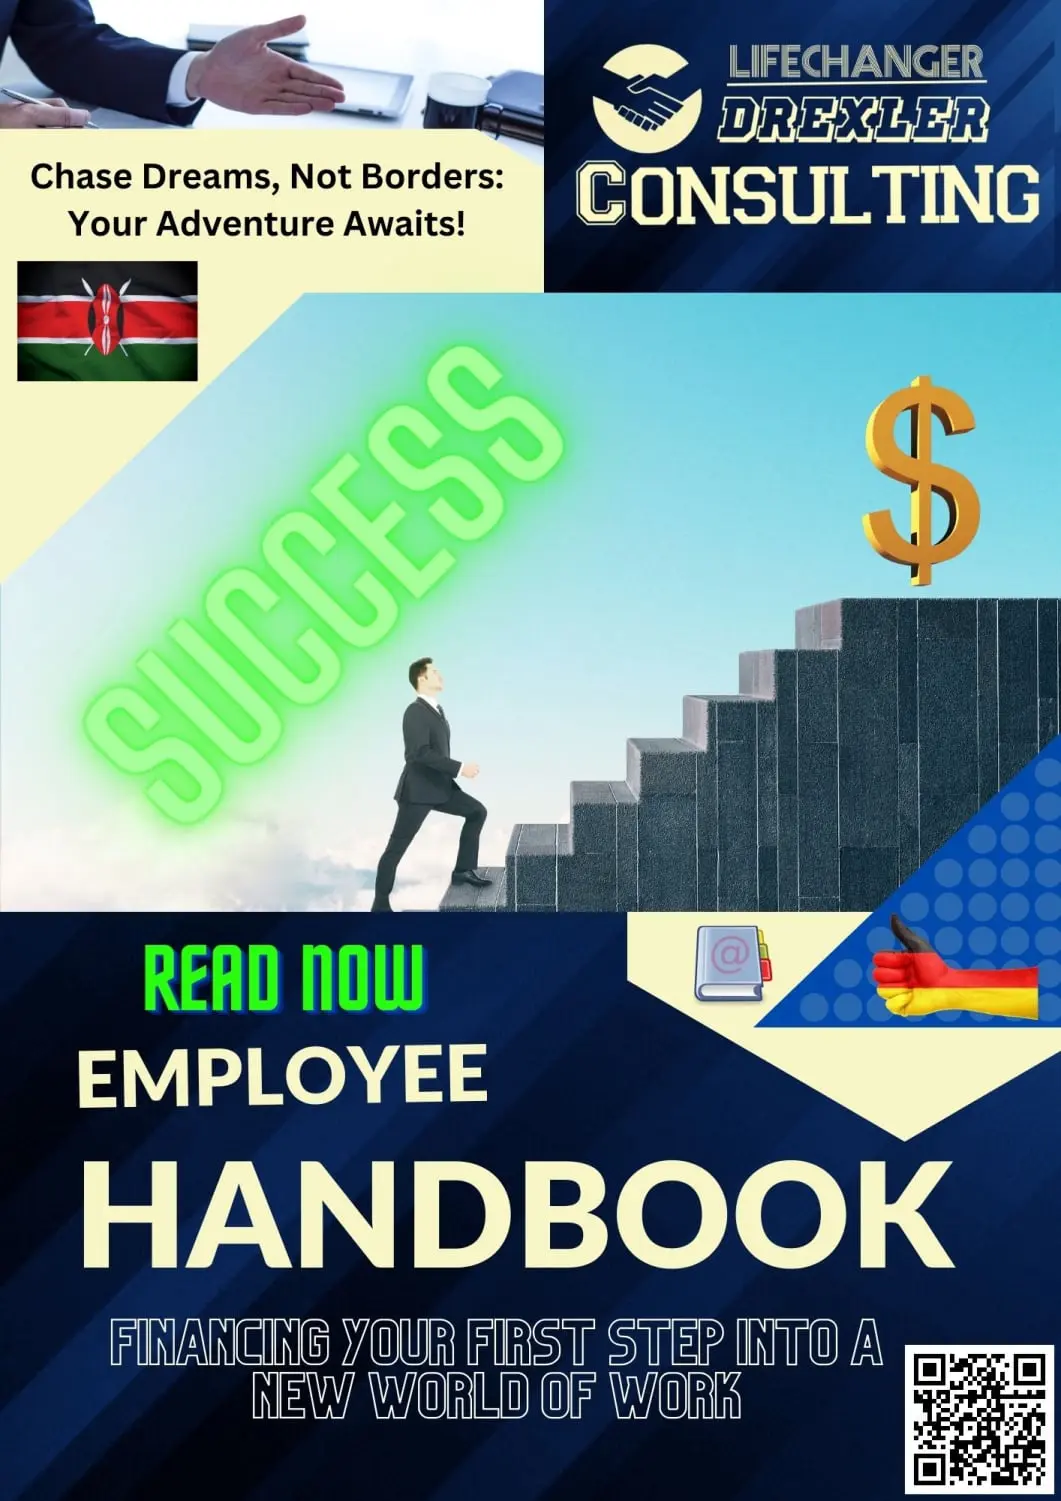 employee handbook promotion for finanzing your first step into a new wolrd of work